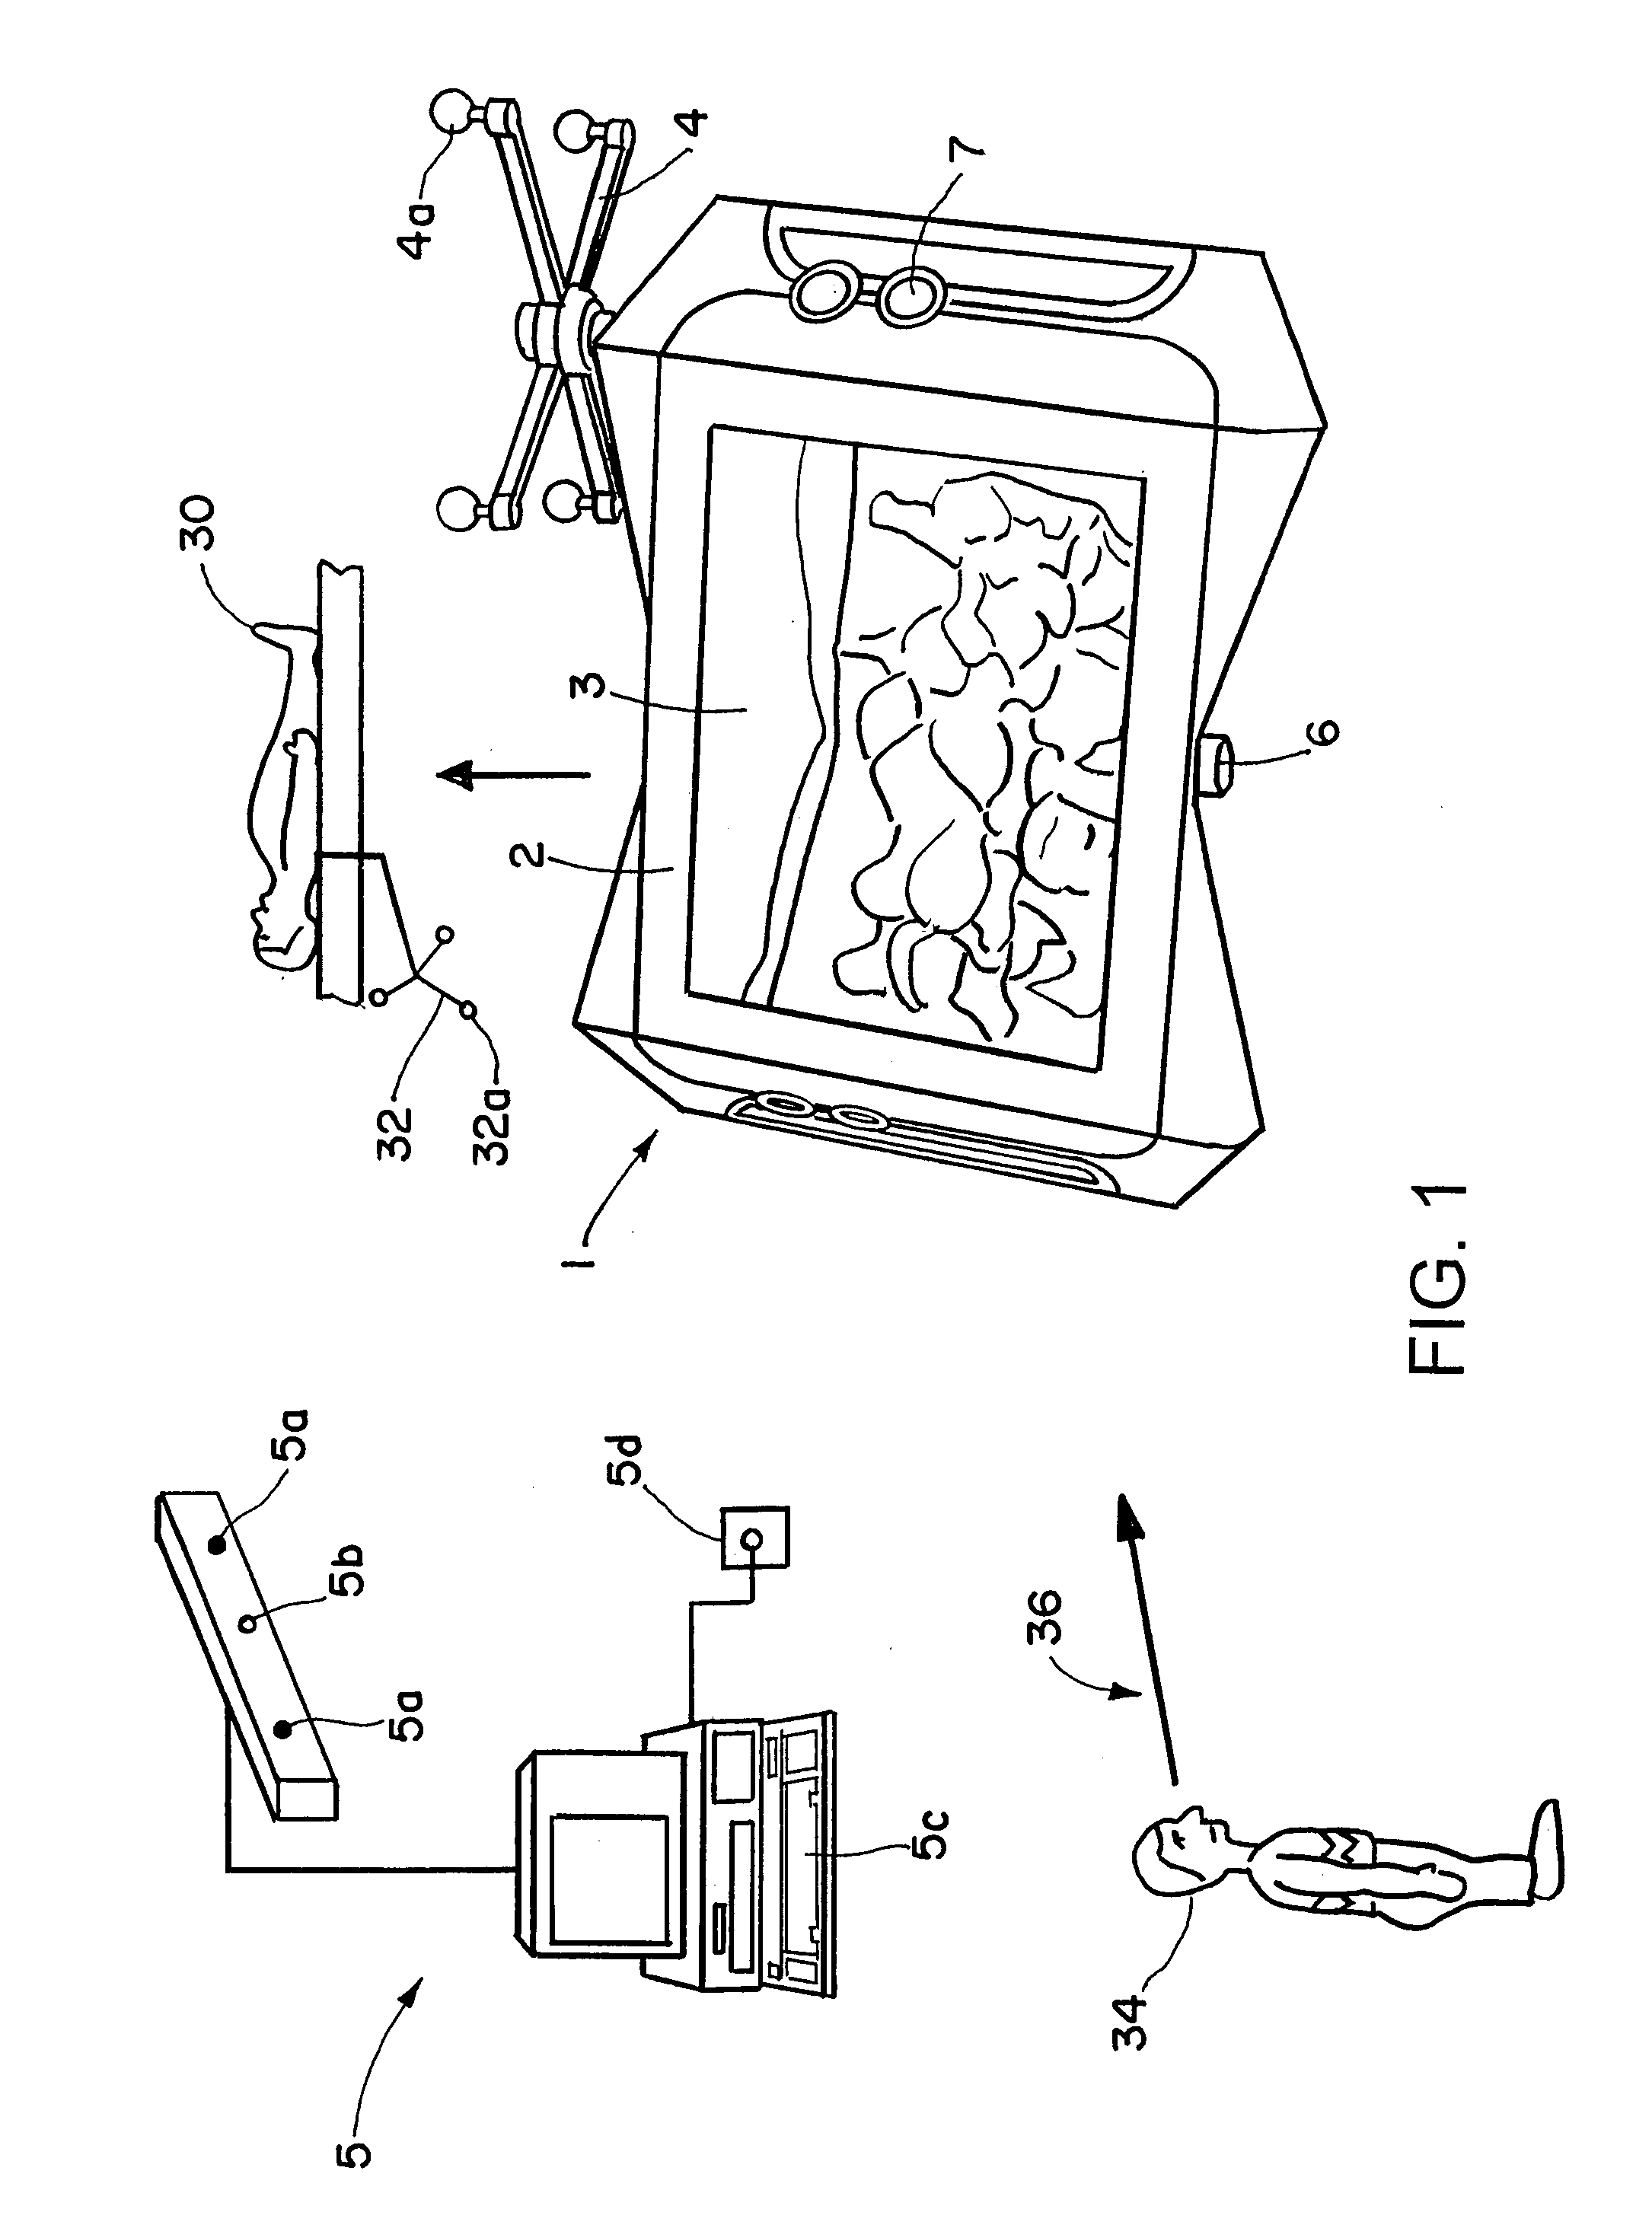 Stereoscopic visualization device for patient image data and video images